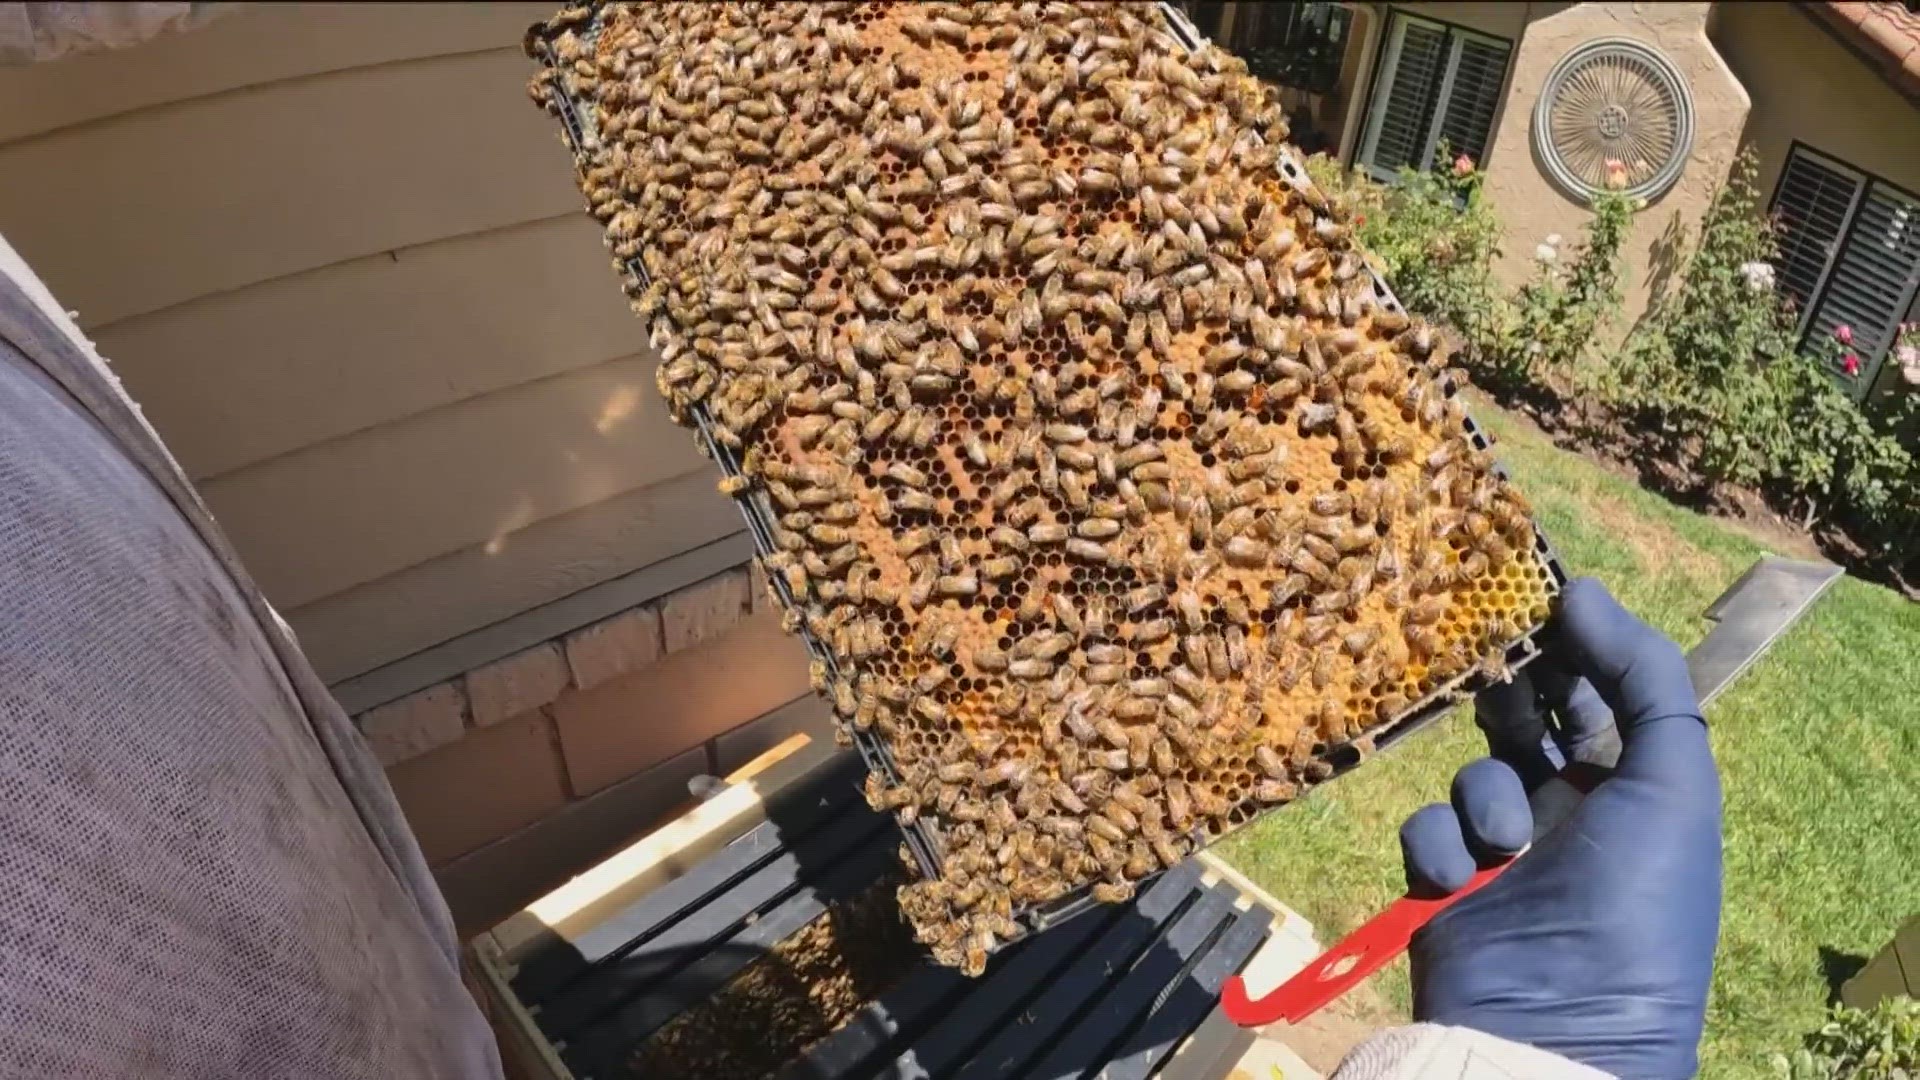 Local beekeepers rave about the environmental benefits and the personal joy in growing the bee population from home.